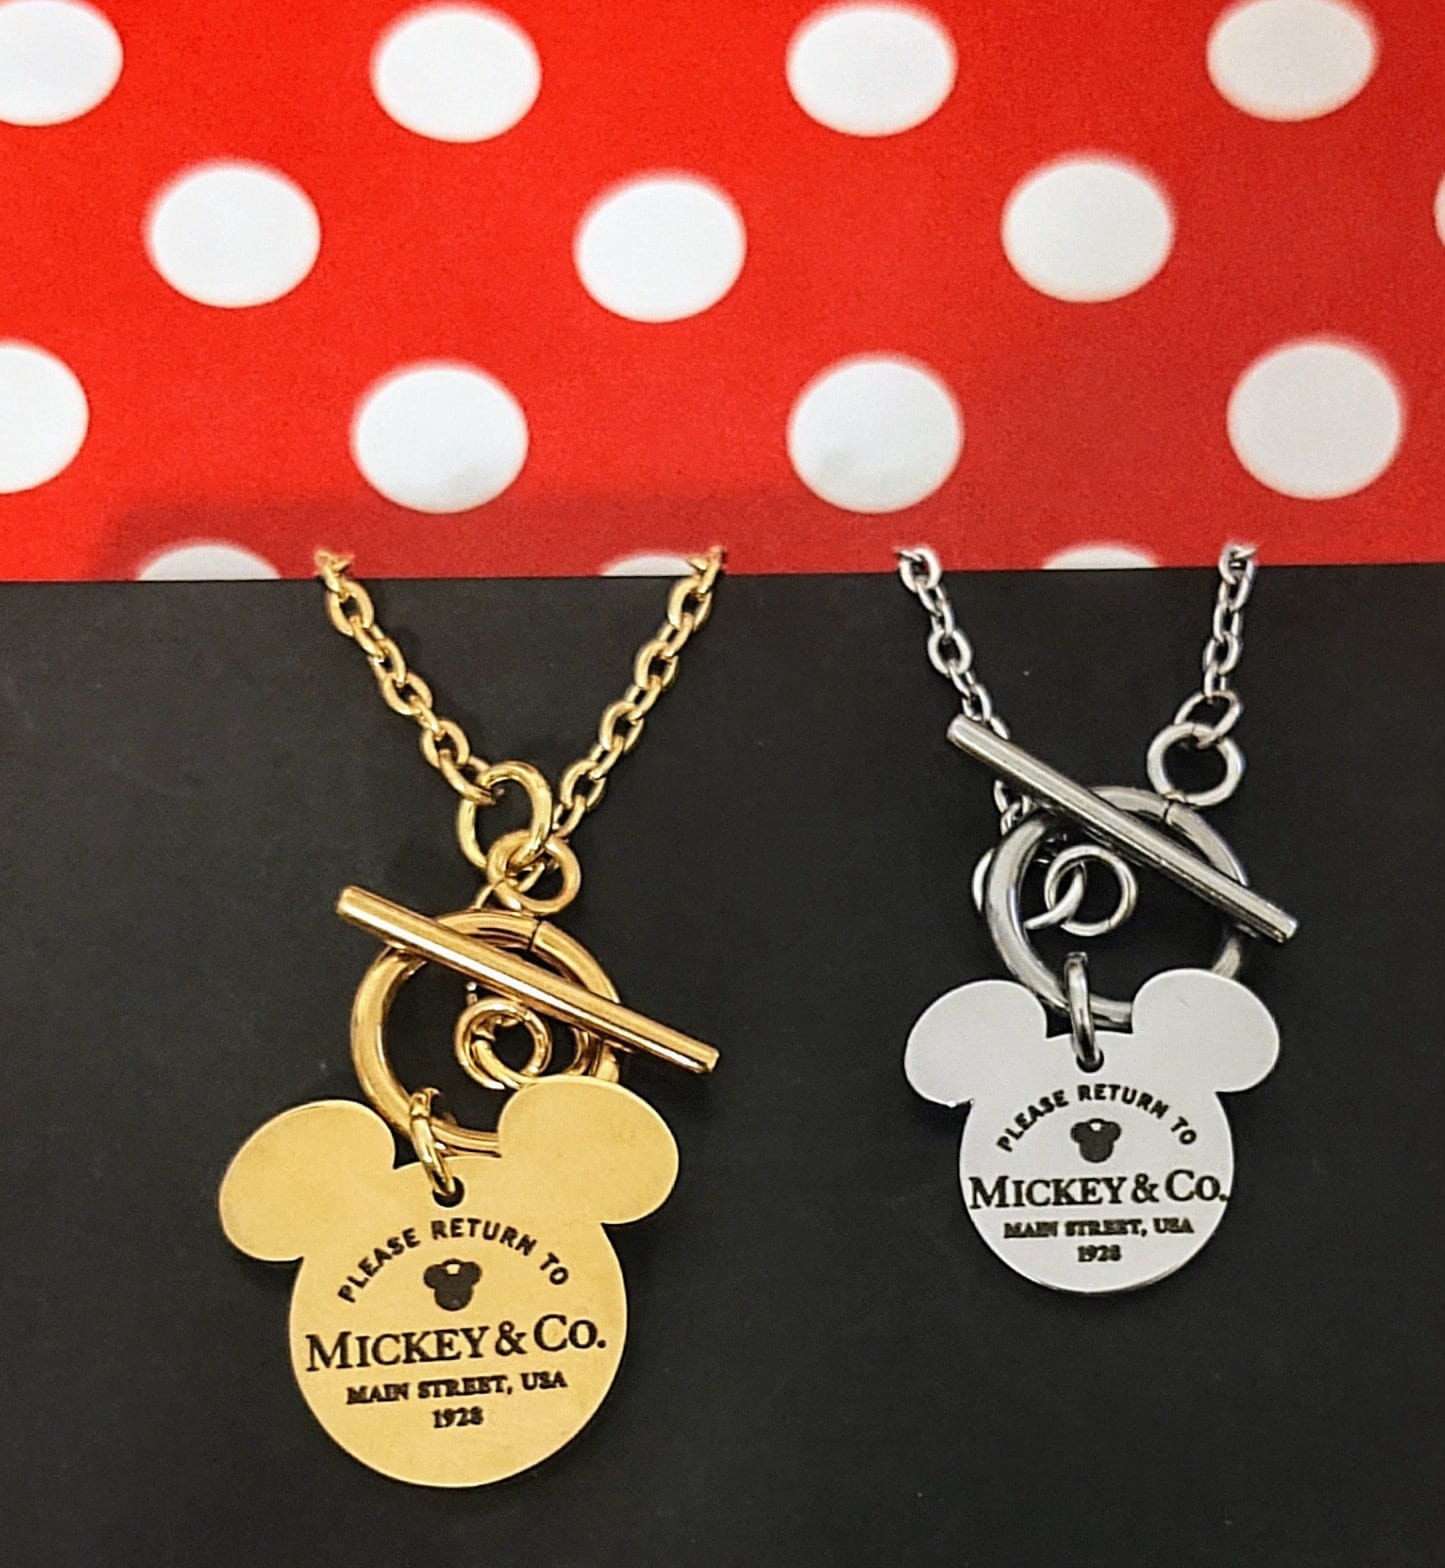 Disney 100 Minnie Mouse 14kt Gold Flash Plated Necklace | eBay